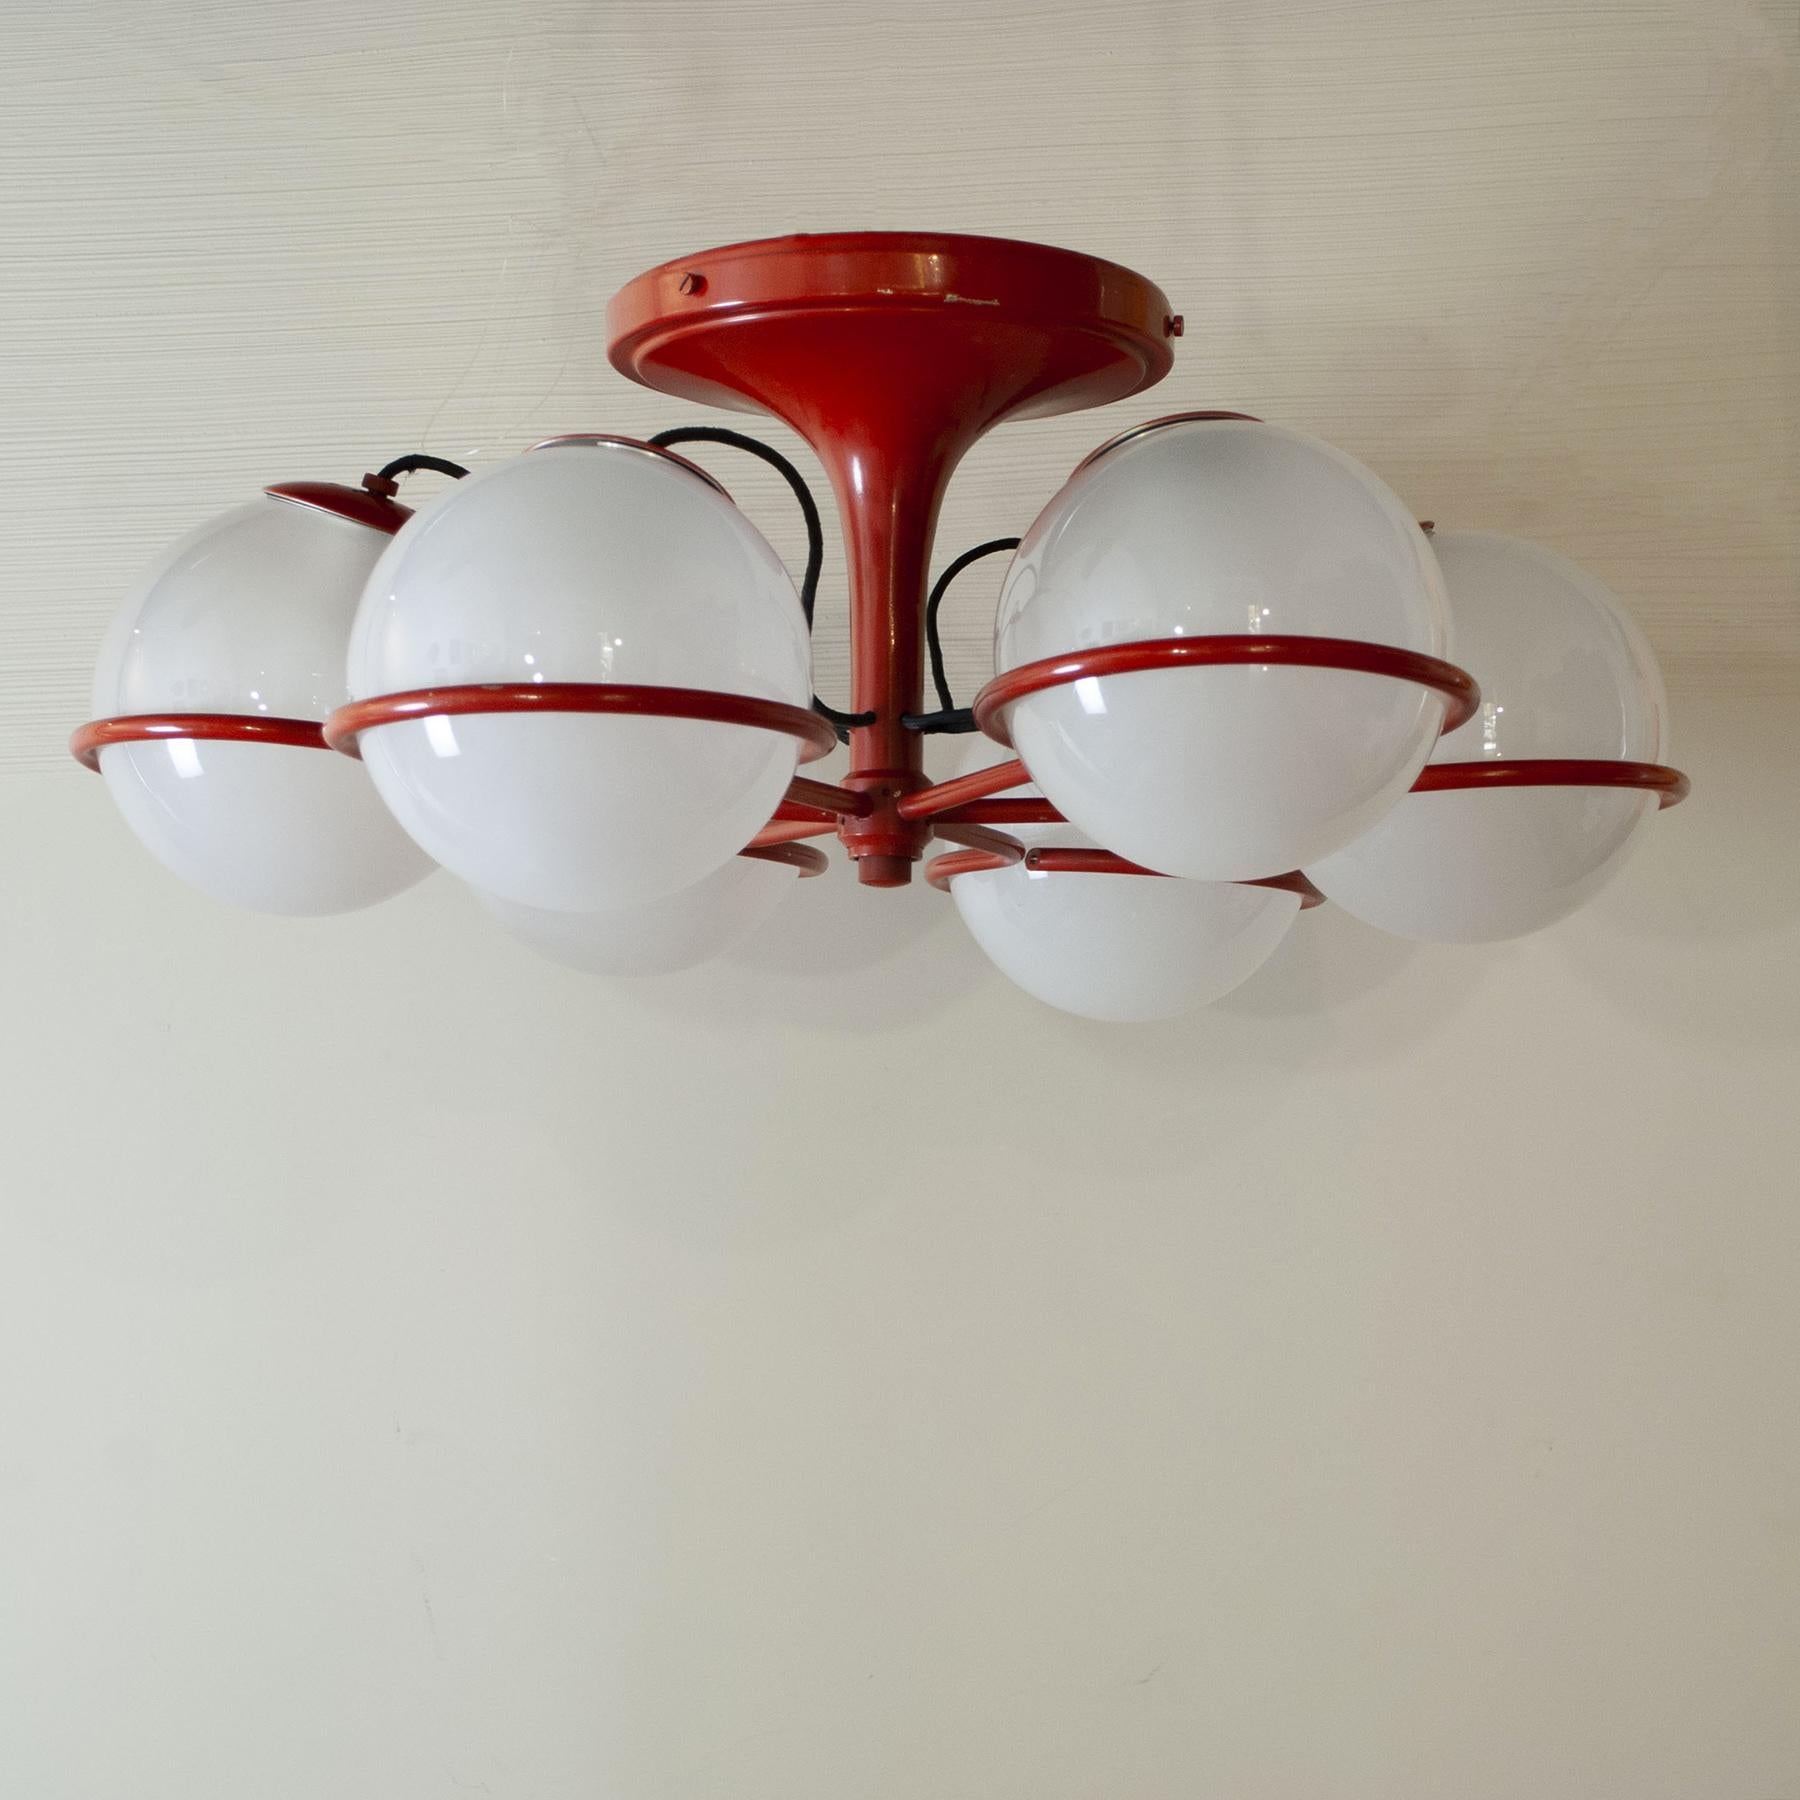 2042/6 Ceiling lamp in brown and red metal with sandblasted glass shades by Sarfatti for Arteluce, 1963
In 1939 he rented the shop in Corso Littorio, later Corso Matteotti, where he remained until 1962.

After the first bombing on Milan, the